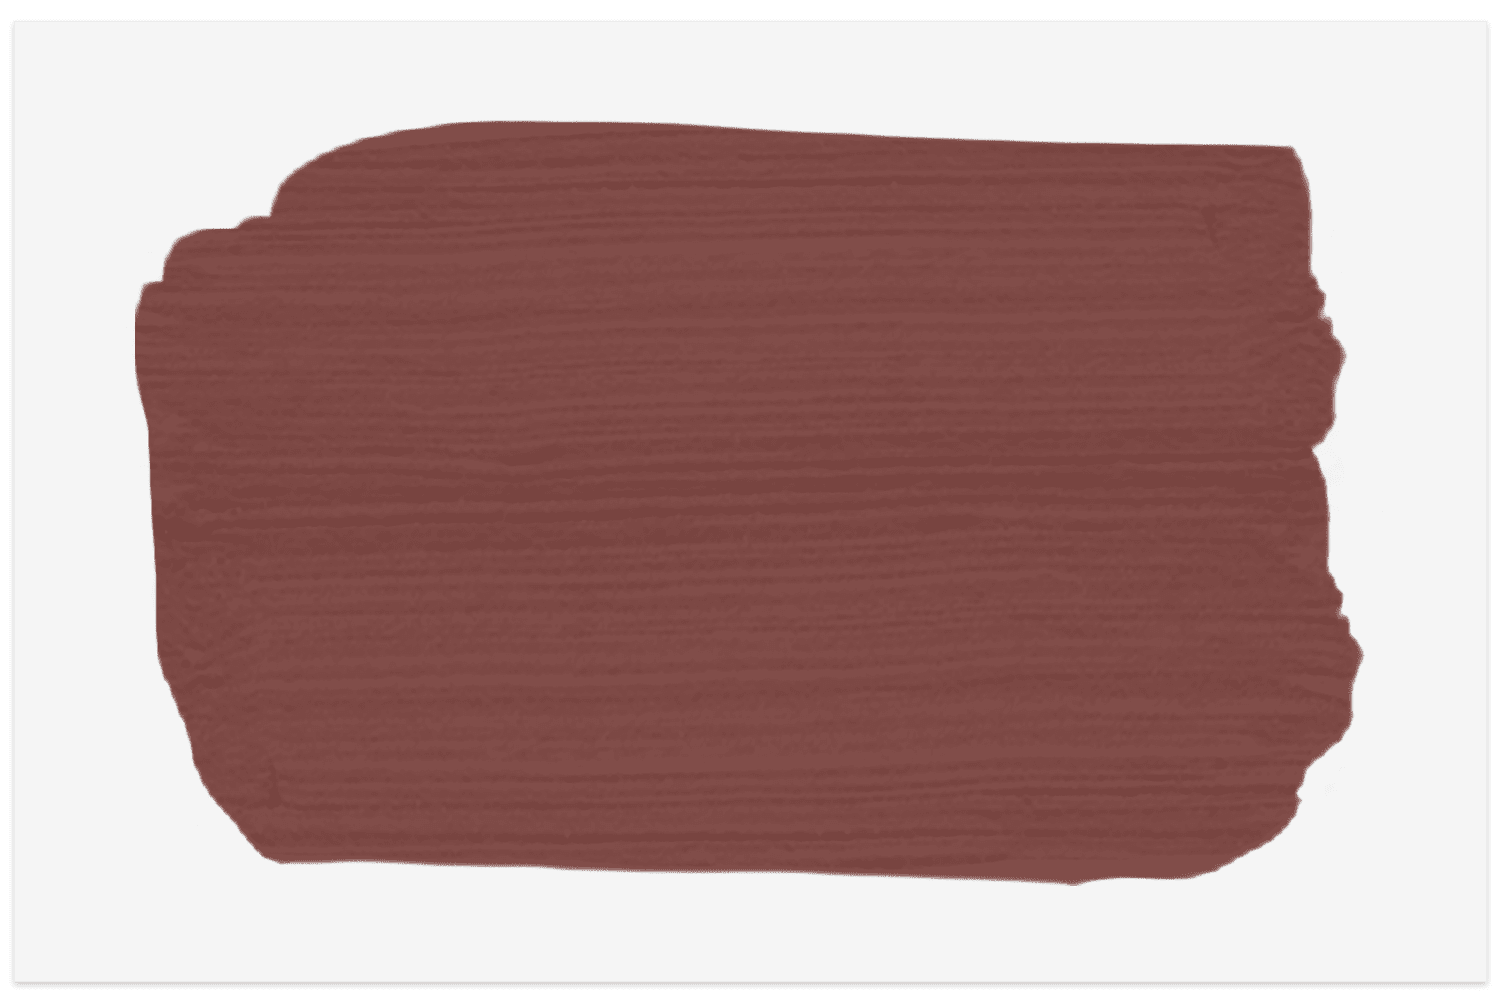 Swatch of PPG Cherokee